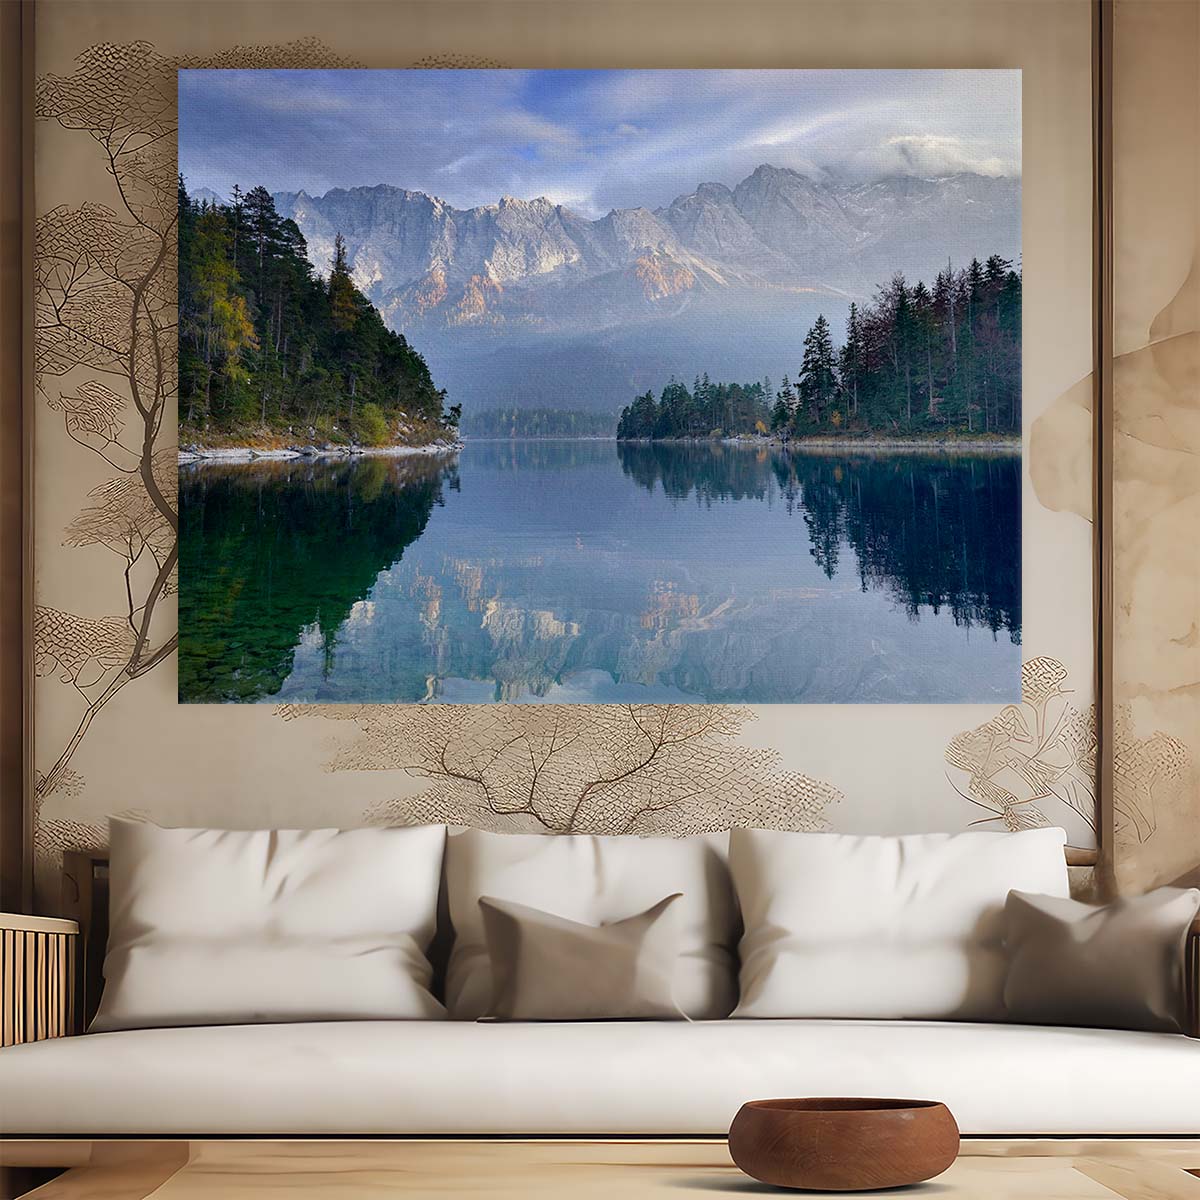 Zugspitze Eibsee Autumn Reflection Landscape Wall Art by Luxuriance Designs. Made in USA.